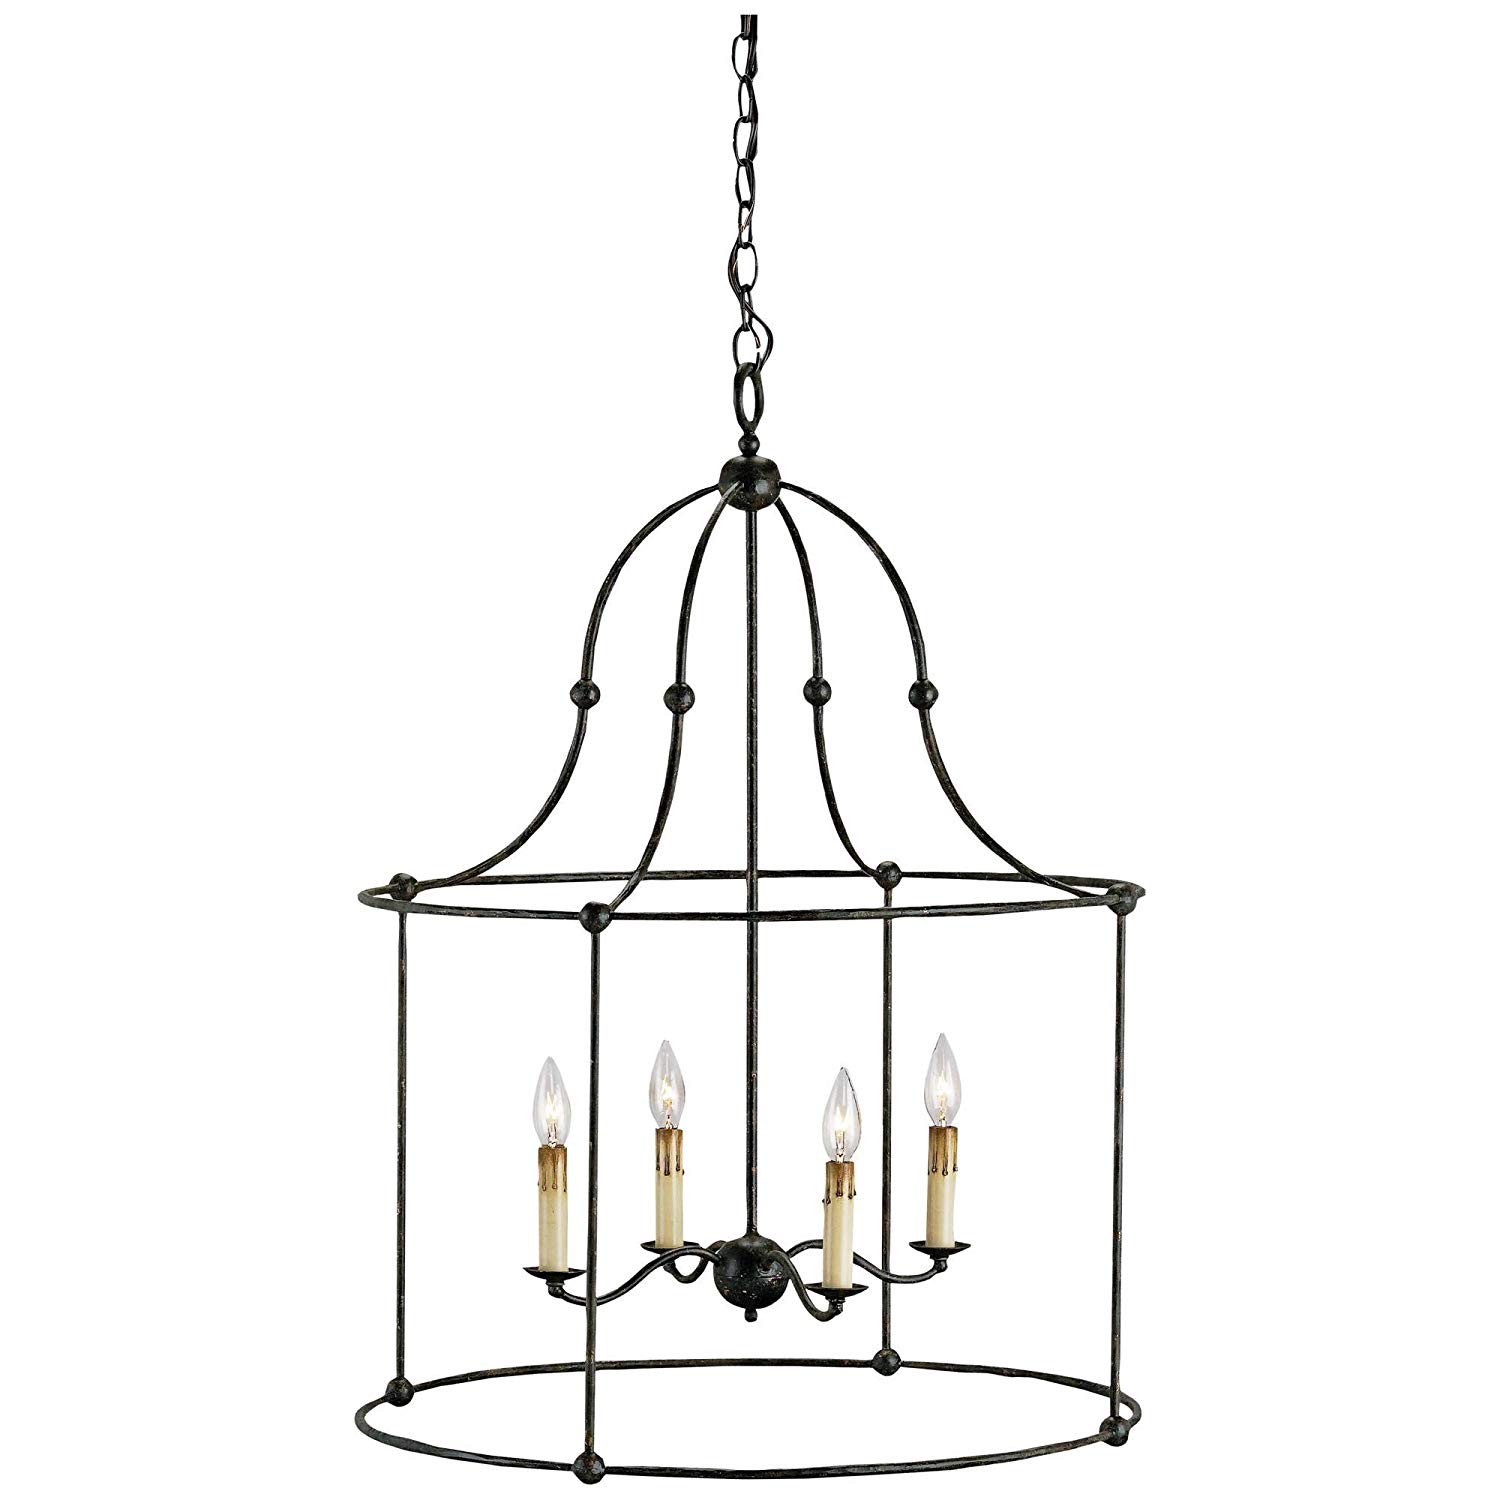 Currey and Company 9160 Fitzjames - Four Light Hanging Lantern, Mayfair Finish.jpg＂>
                  </noscript><img class=